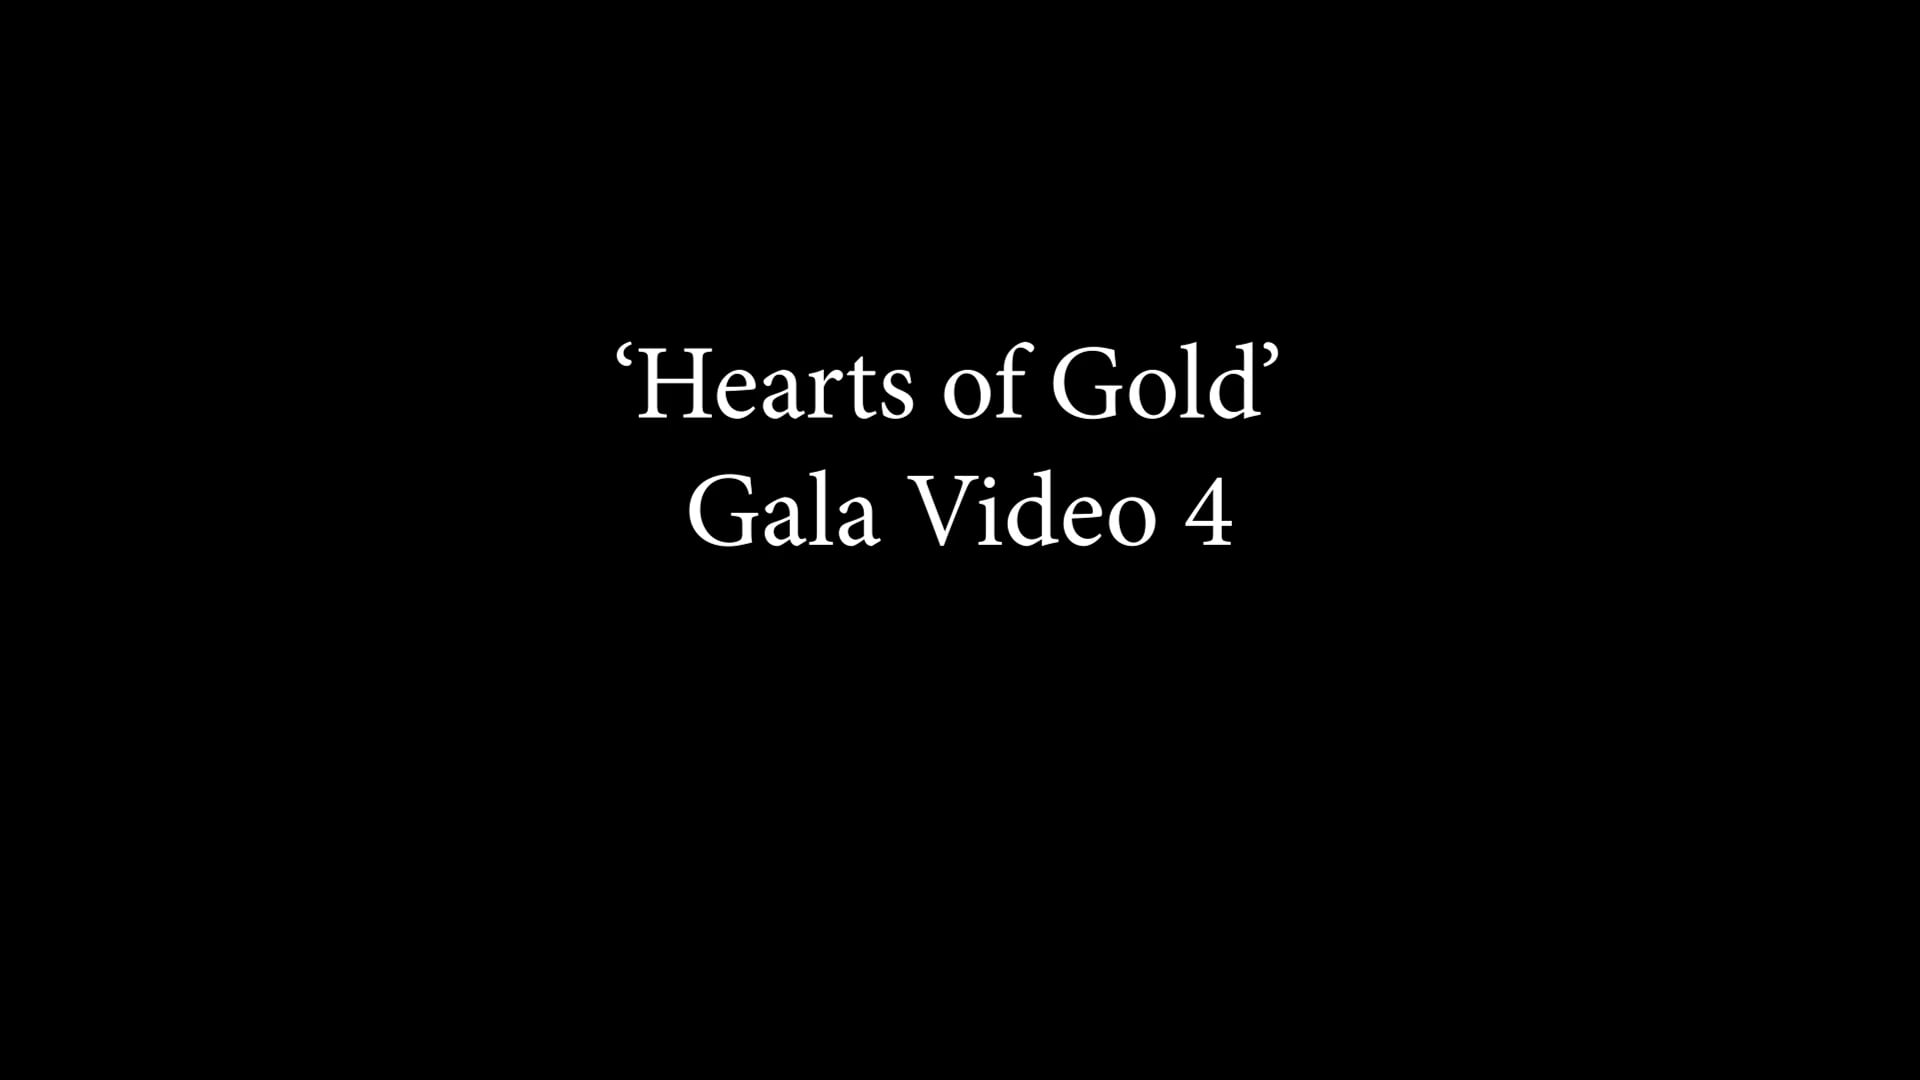 Hearts of Gold Gala Video 1